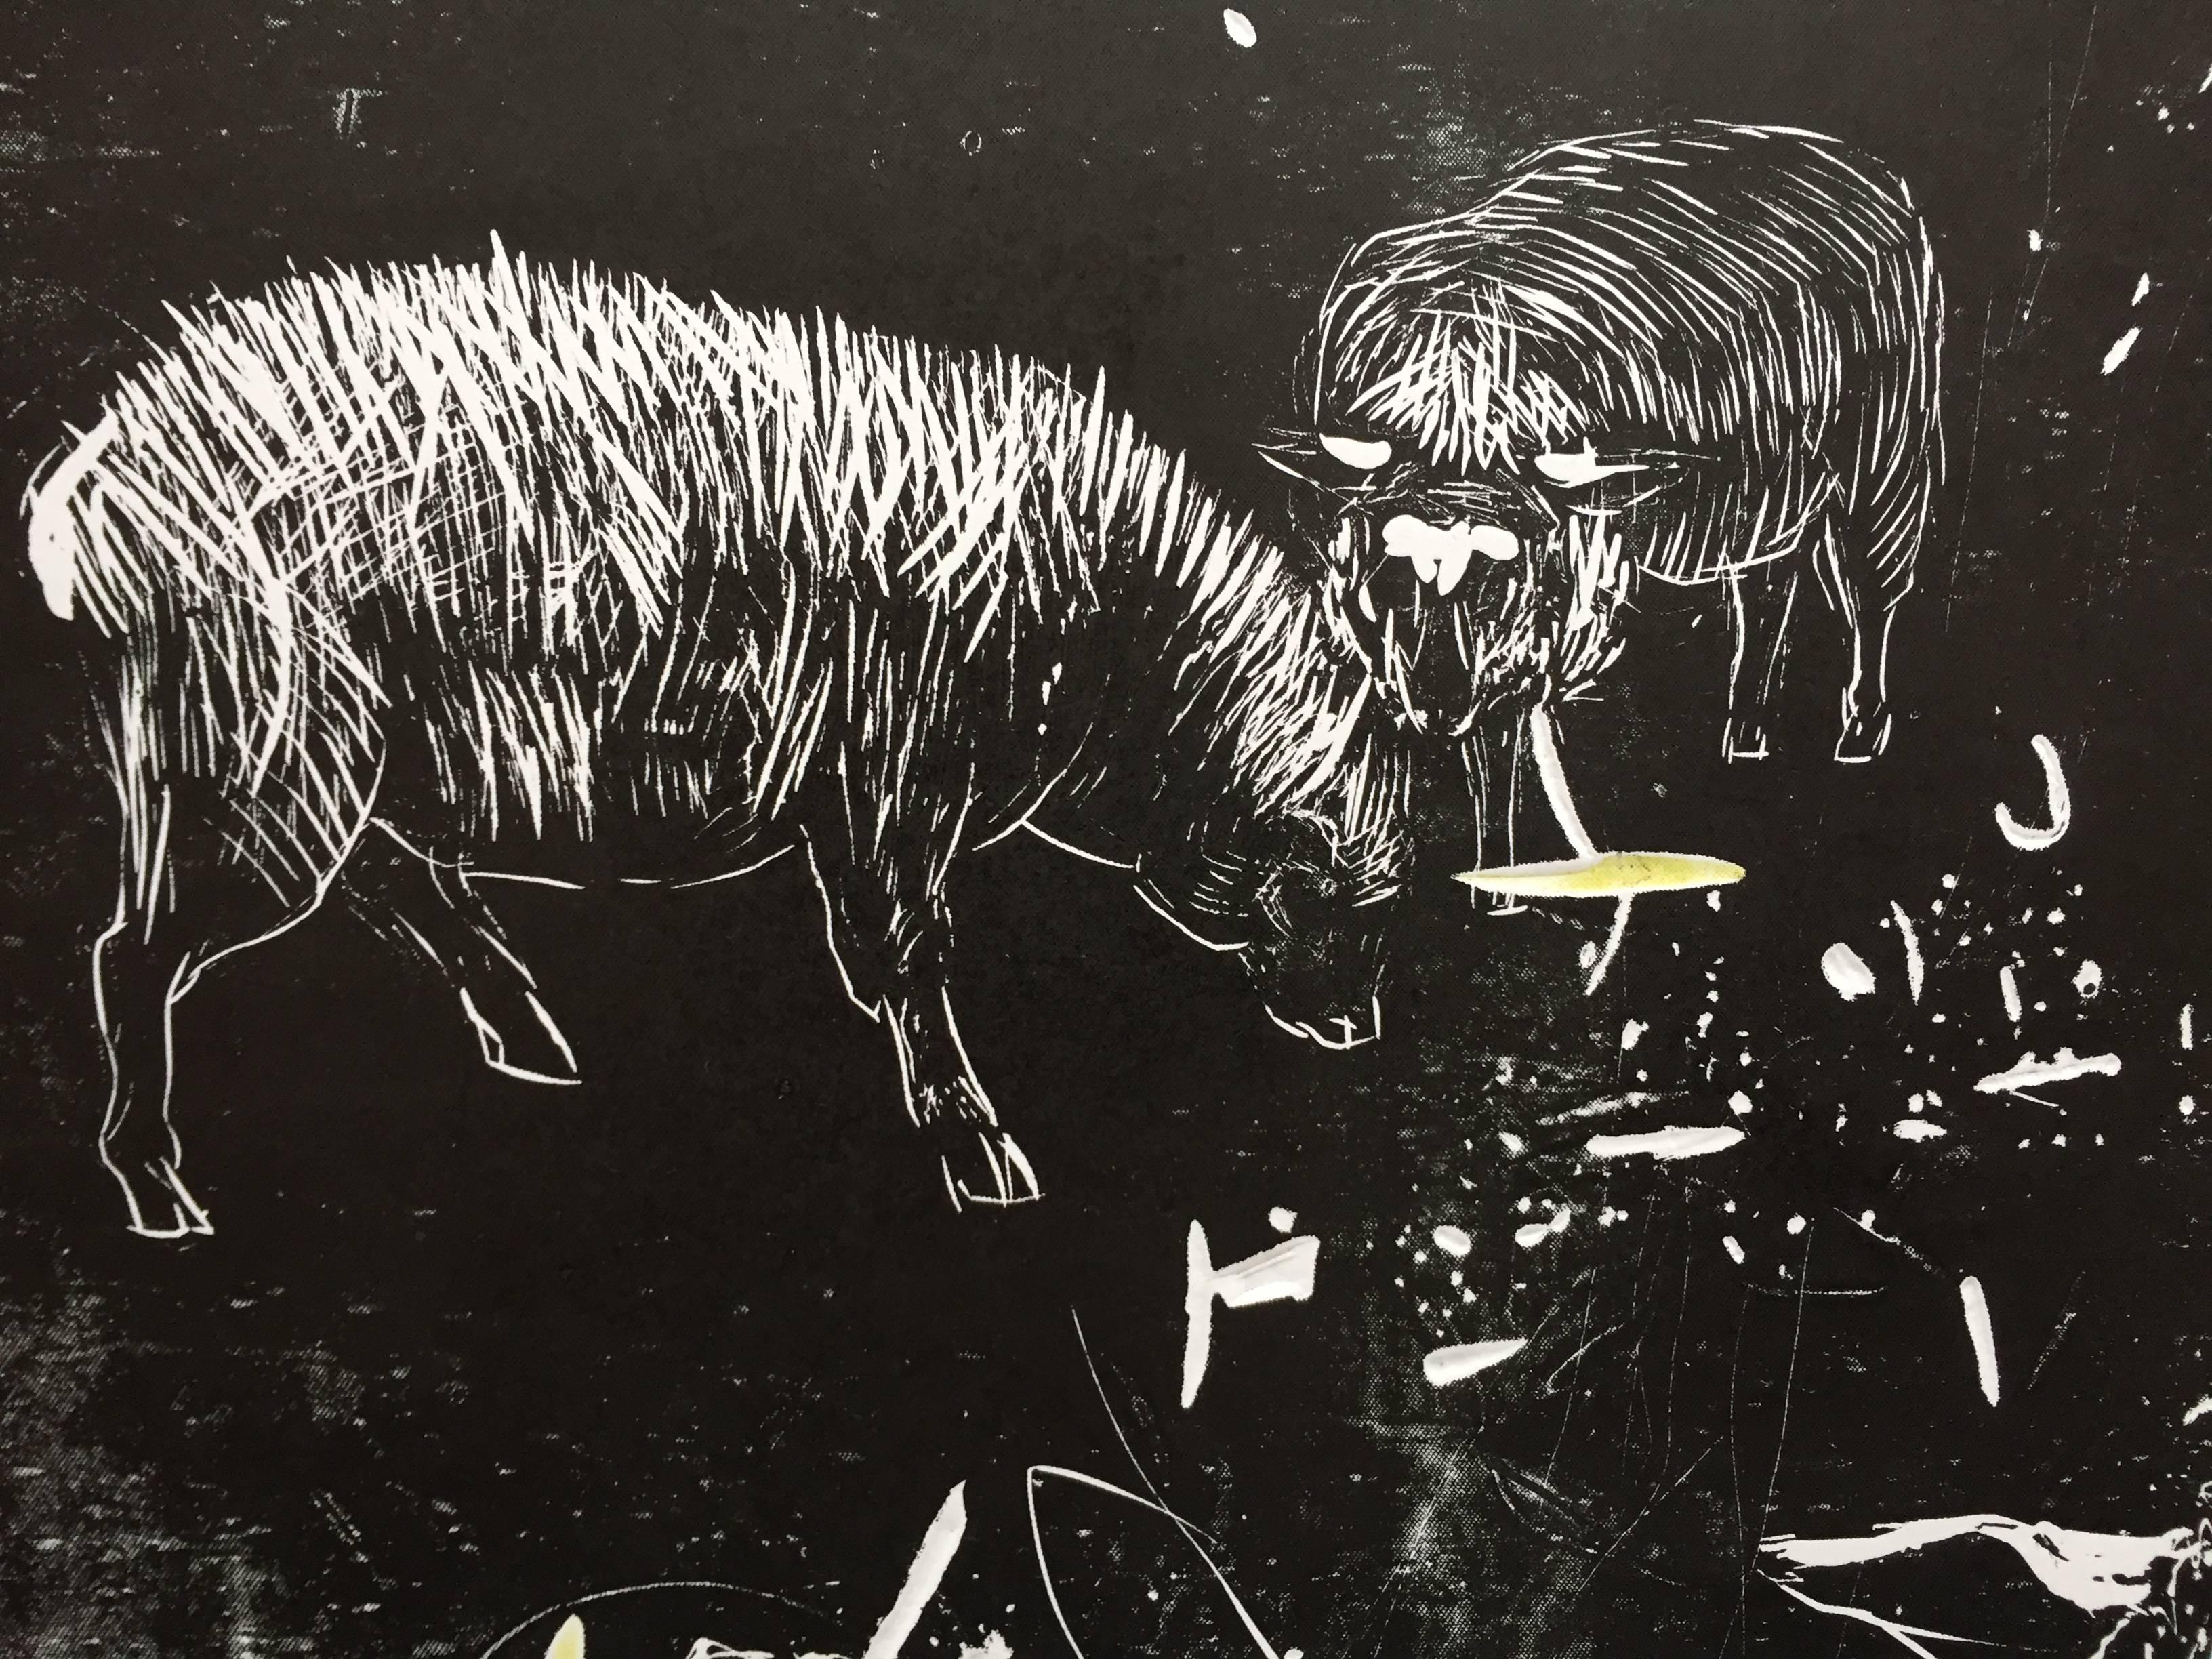 Black Sheep - Original handsigned linocut, limited edition of 16 prints - Contemporary Print by Tereza Lochmann